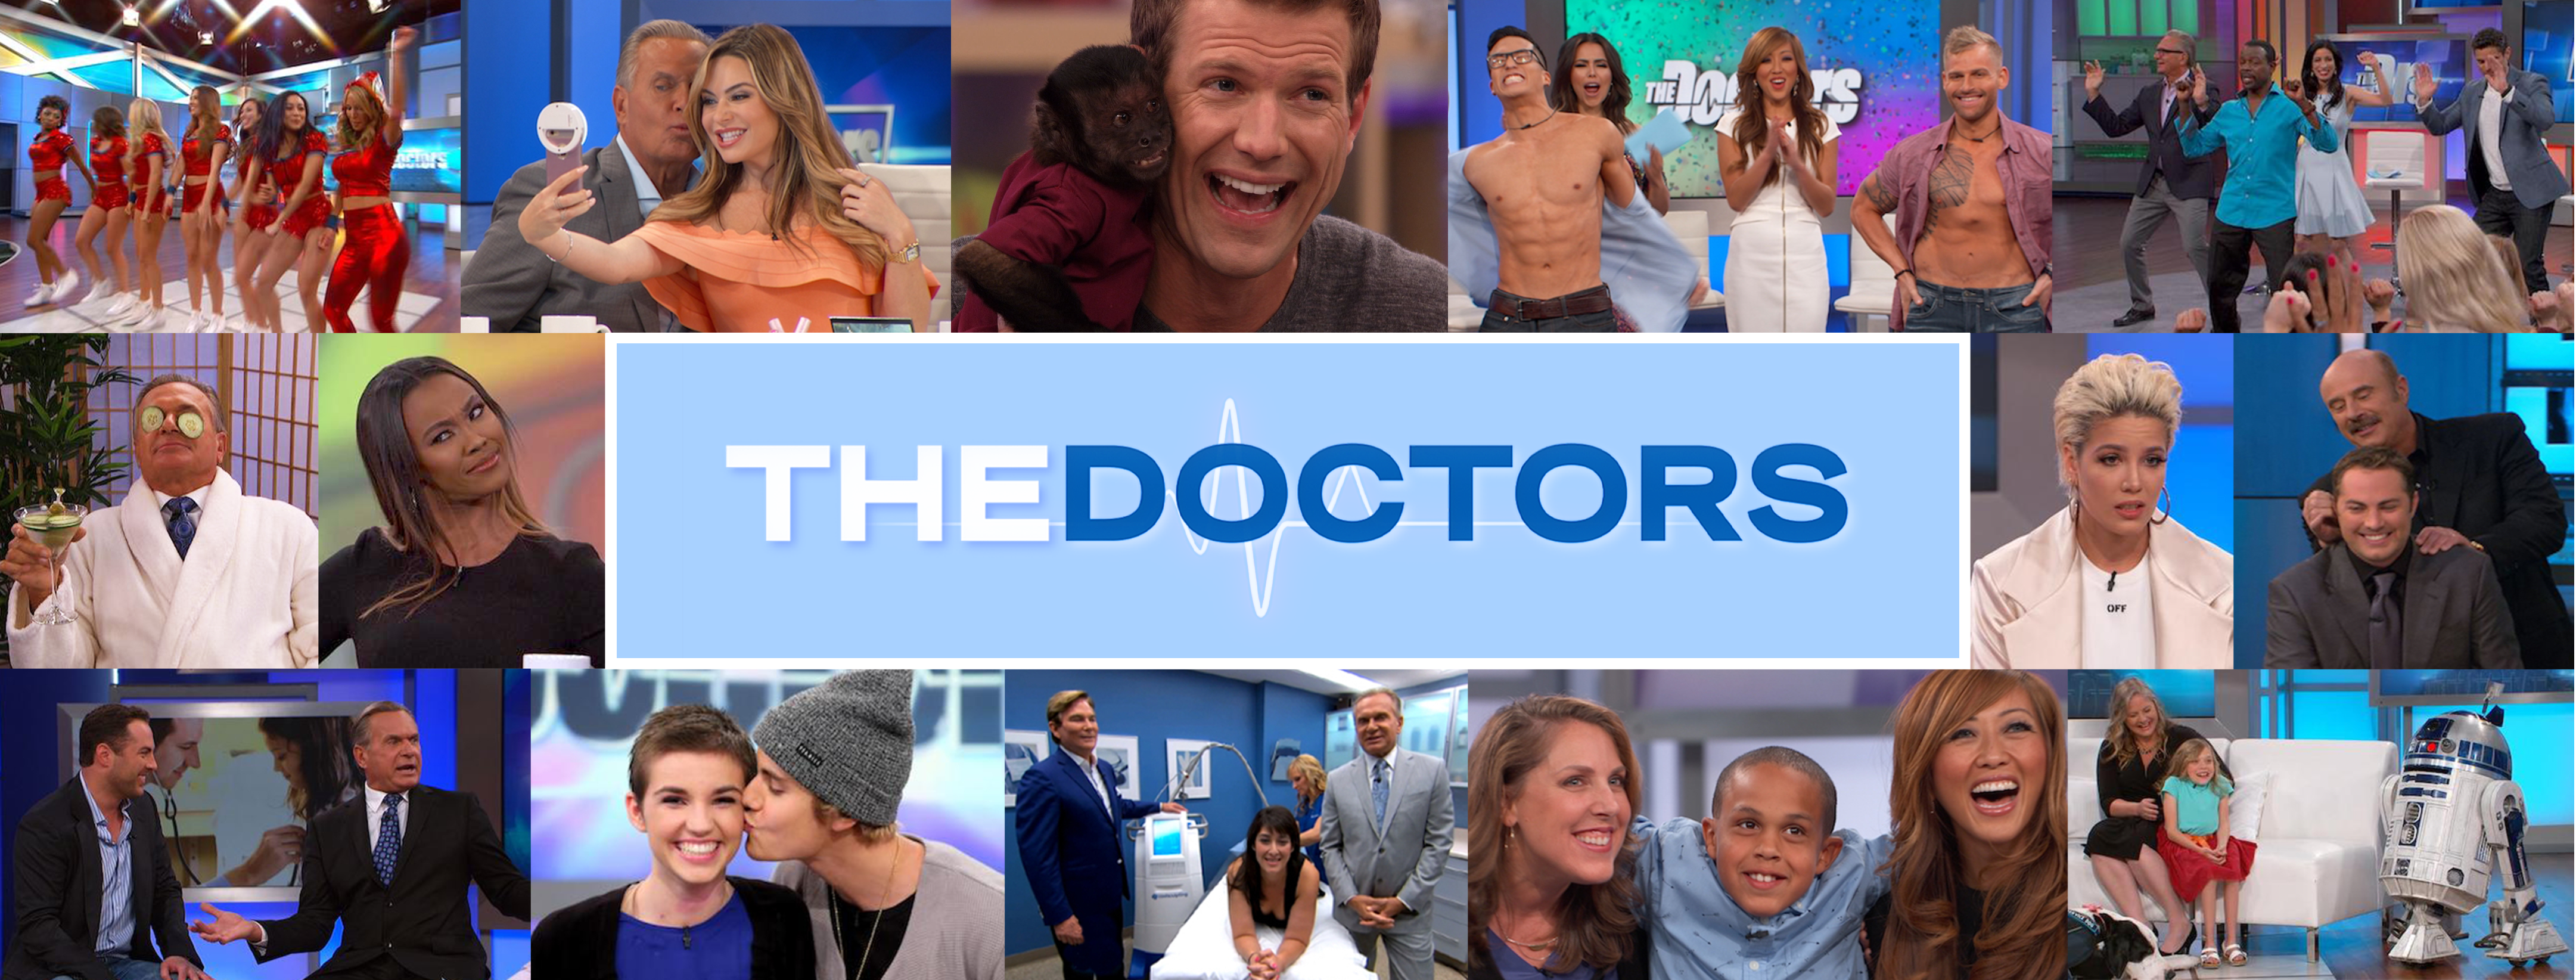 Bedwetting Blues | The Doctors TV Show